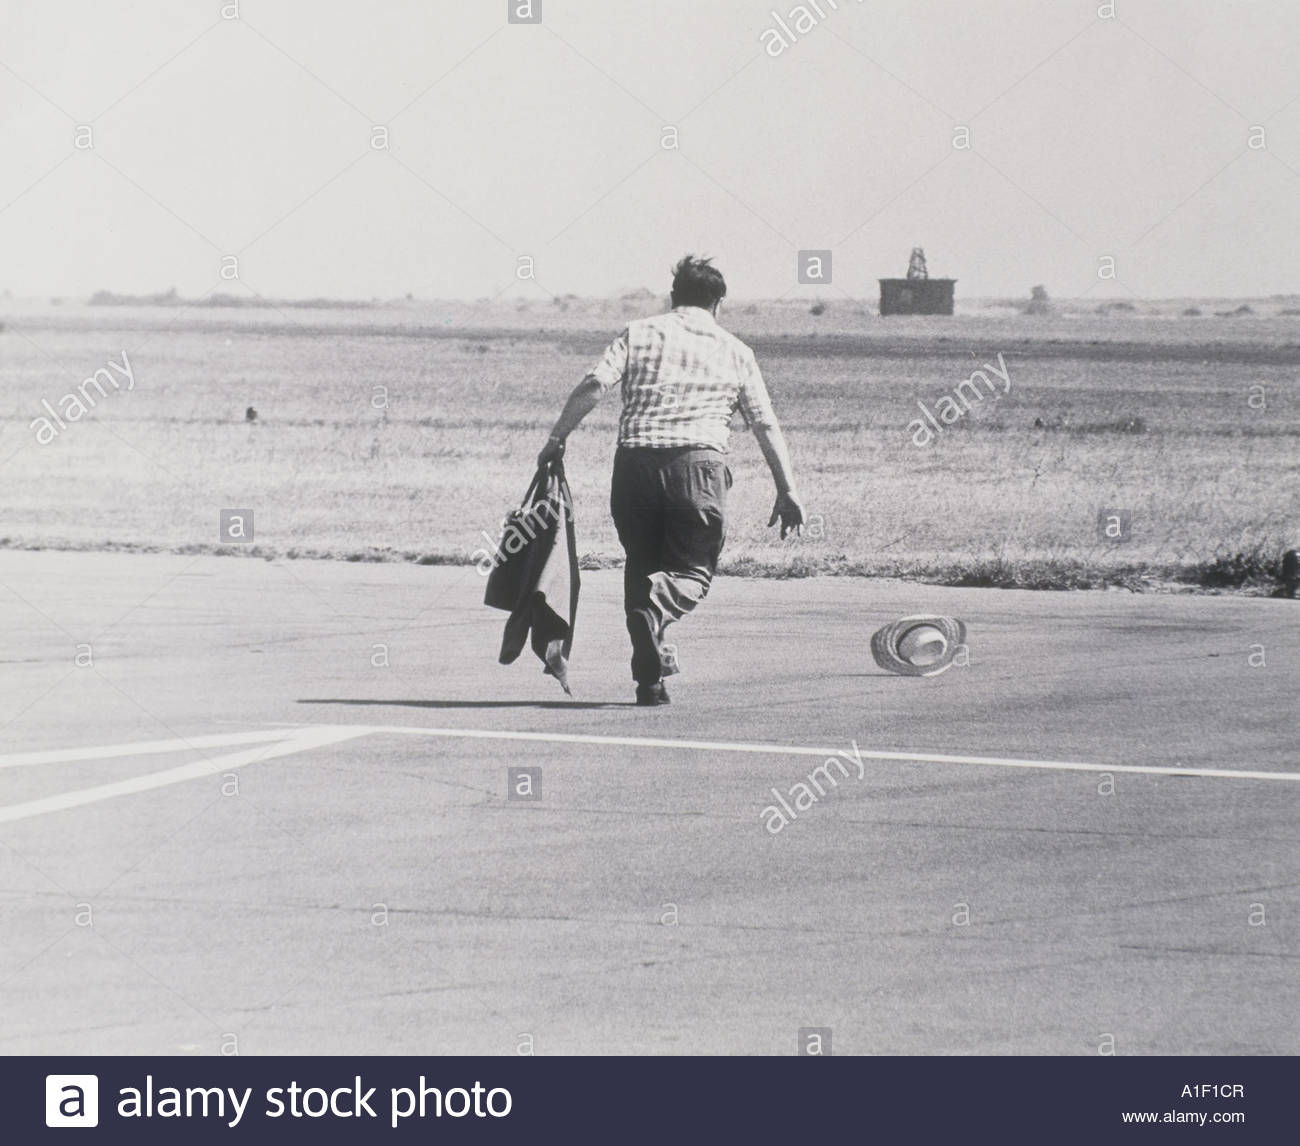 man-chasing-his-hat-blown-by-the-wind-A1F1CR.jpg